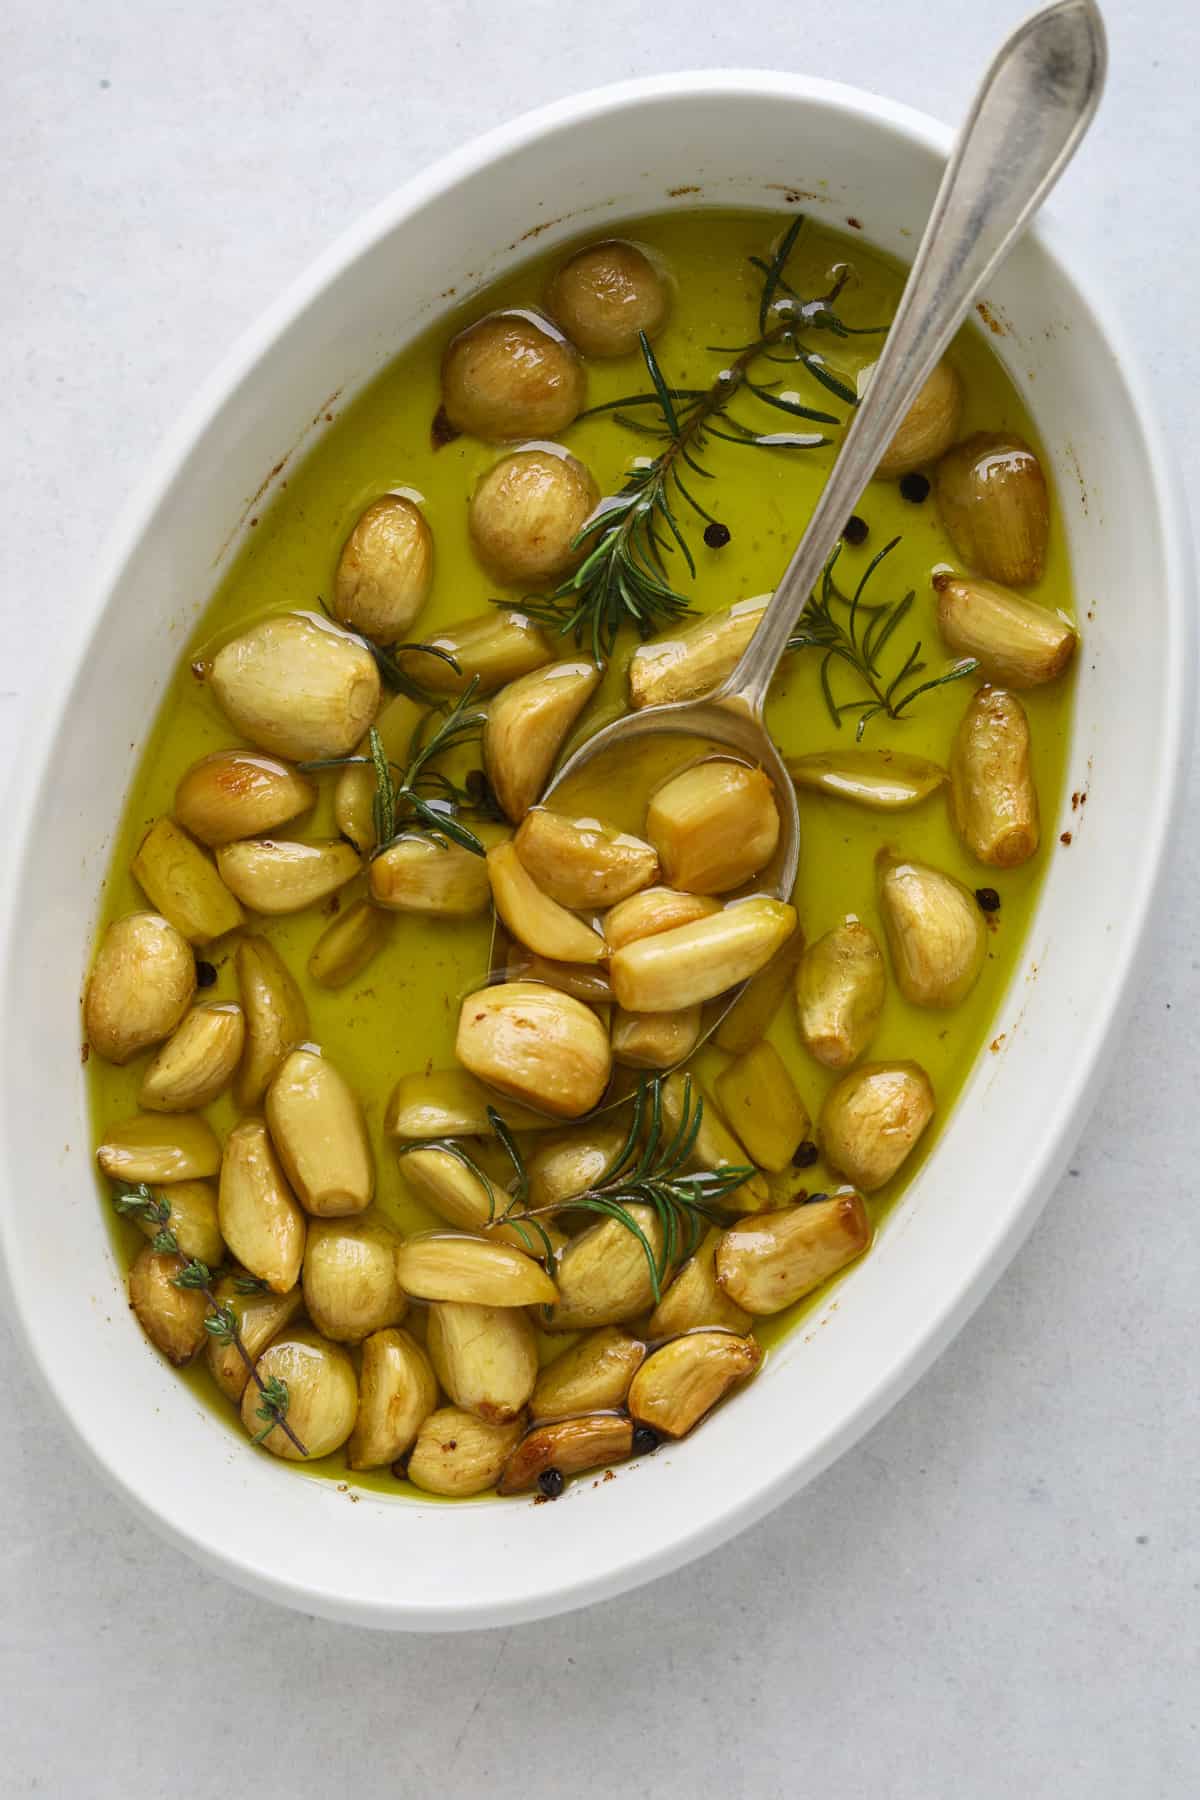 a white oval baking dish filled with roasted garlic cloves, olive oil and rosemary